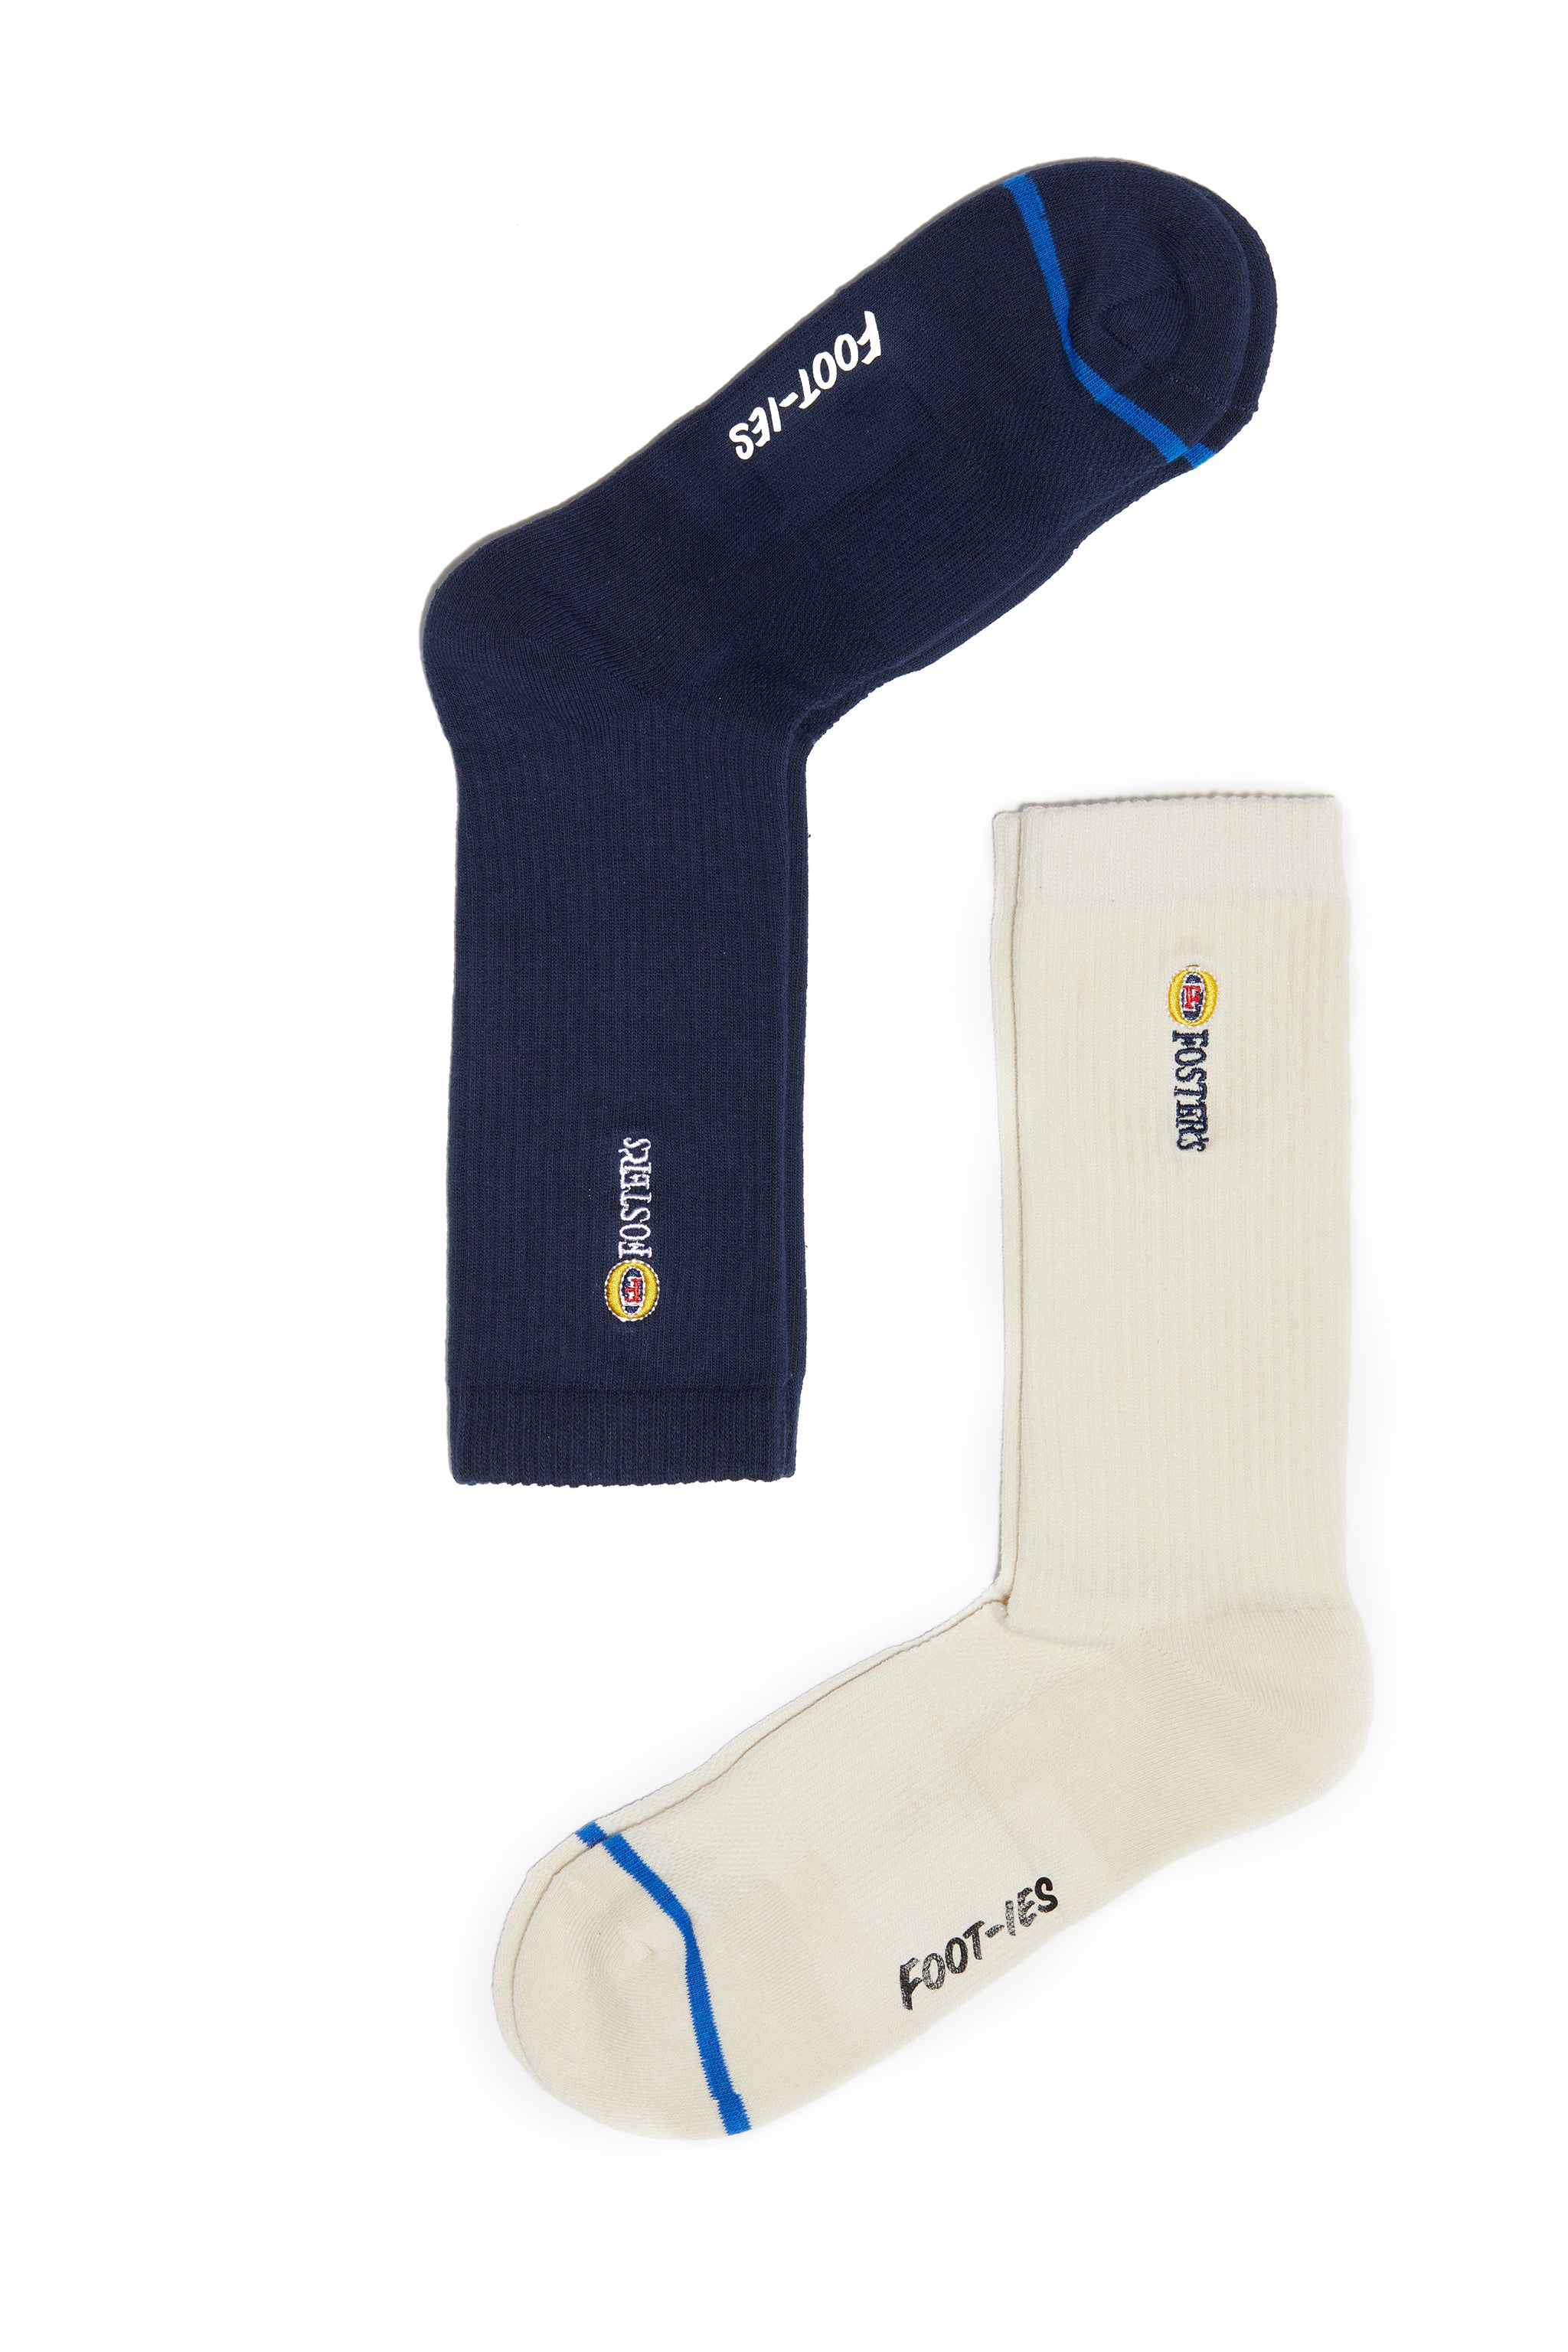 Fosters Embroidered 2 Pack Socks